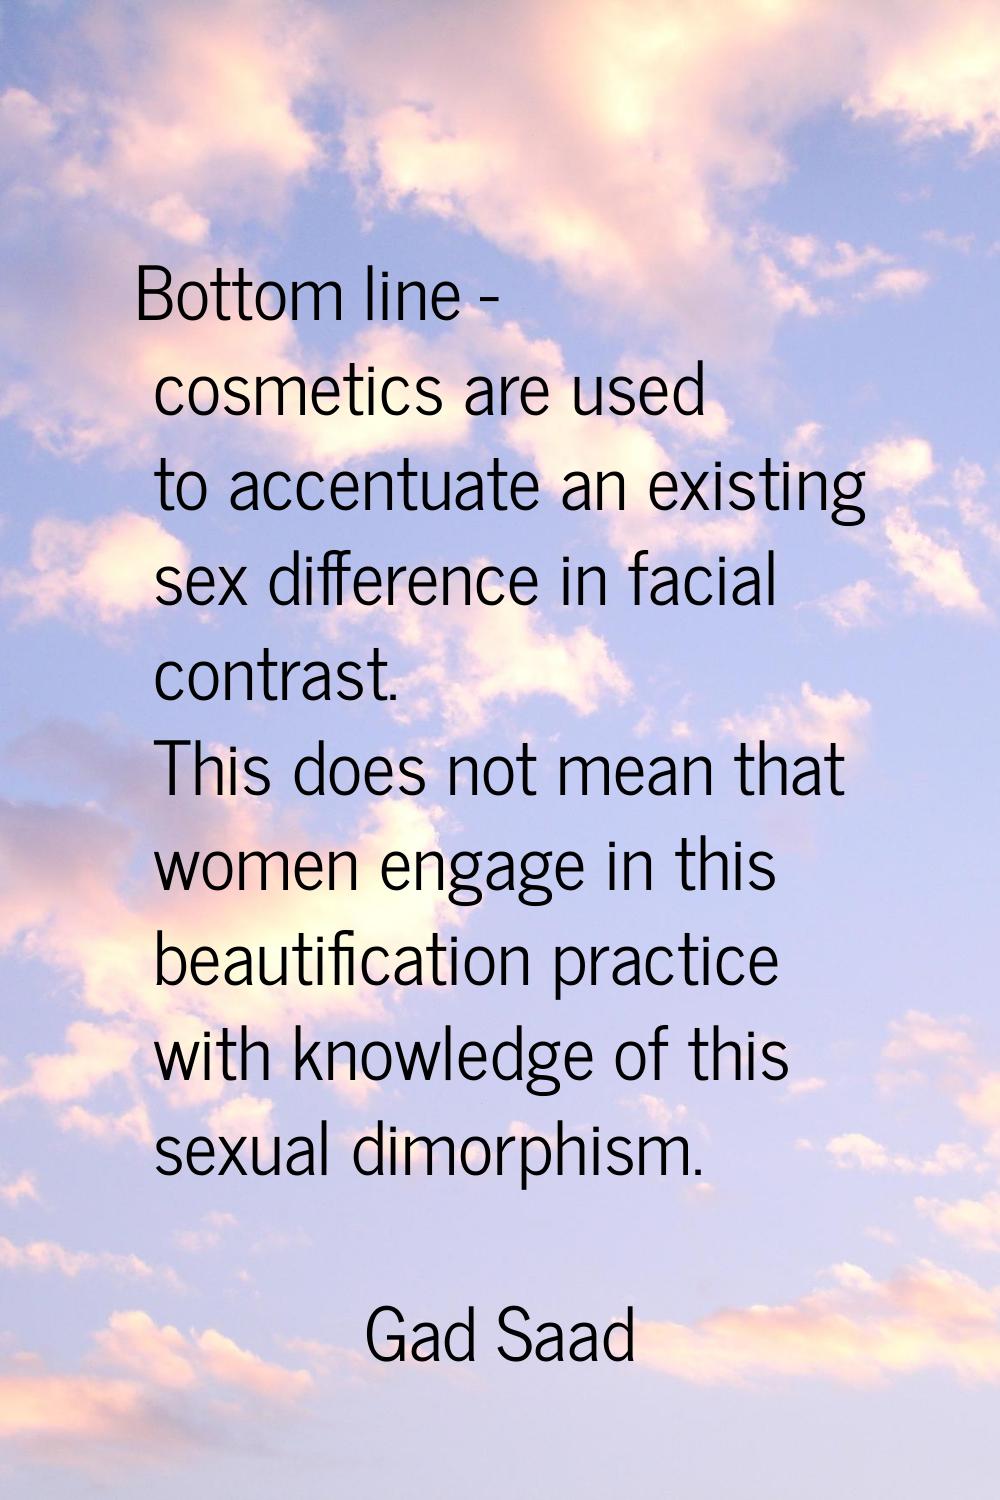 Bottom line - cosmetics are used to accentuate an existing sex difference in facial contrast. This 